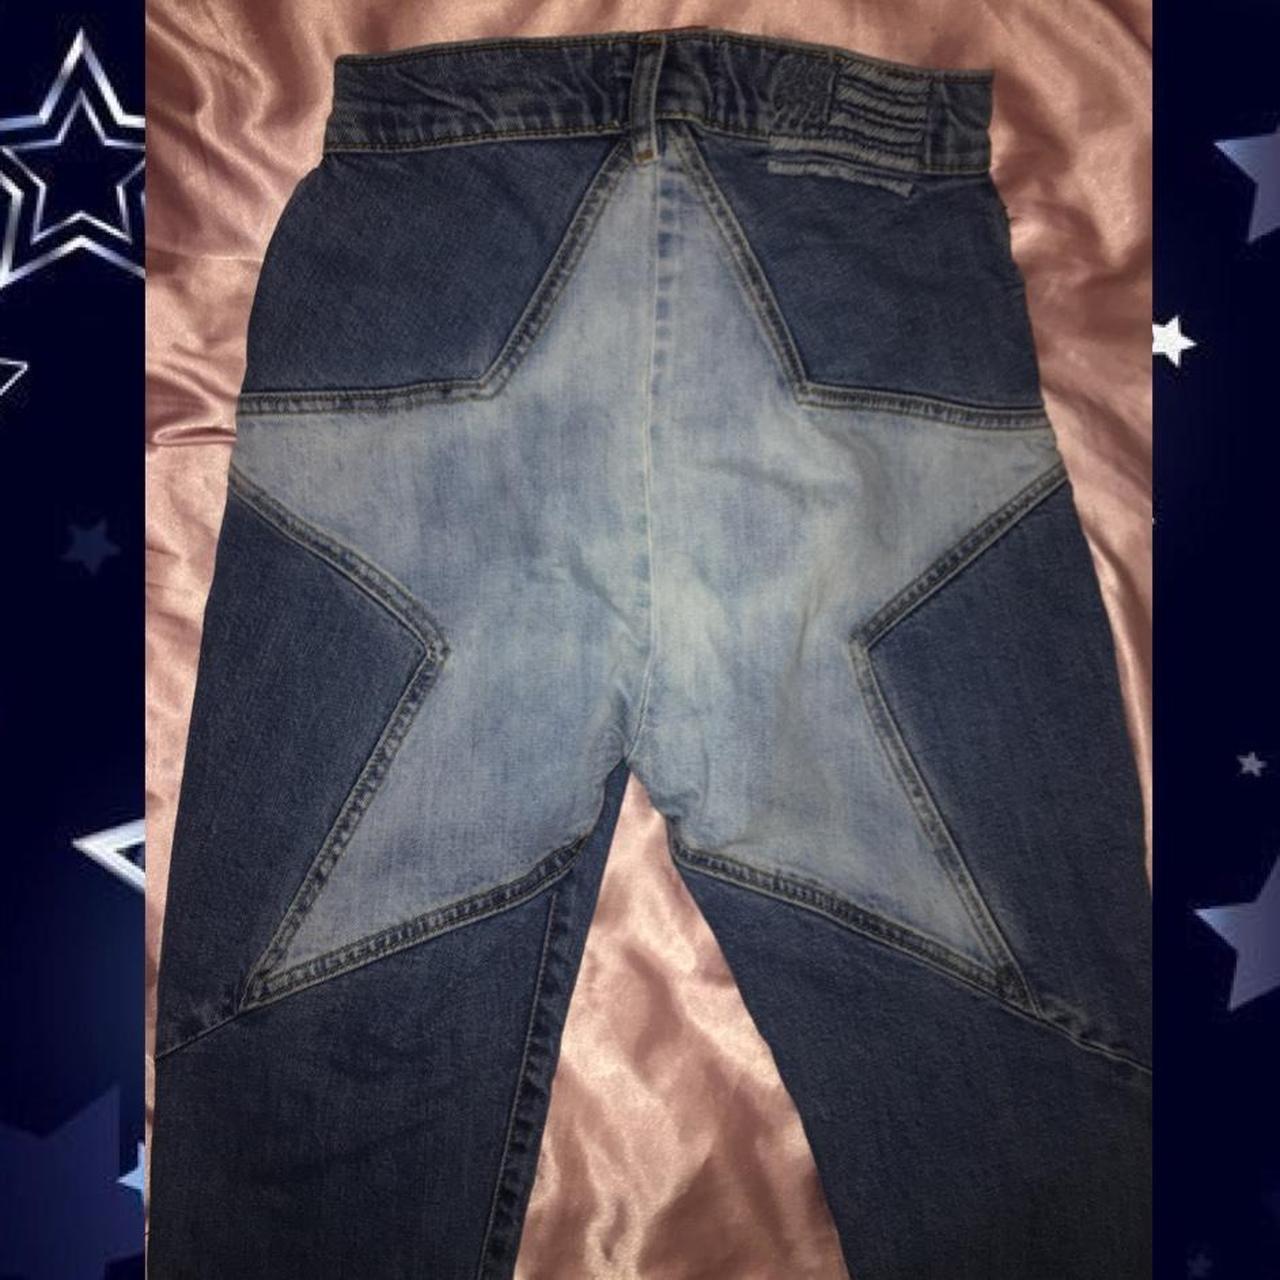 Pocketless Star Jeans⭐️ These are so cute! Says size - Depop